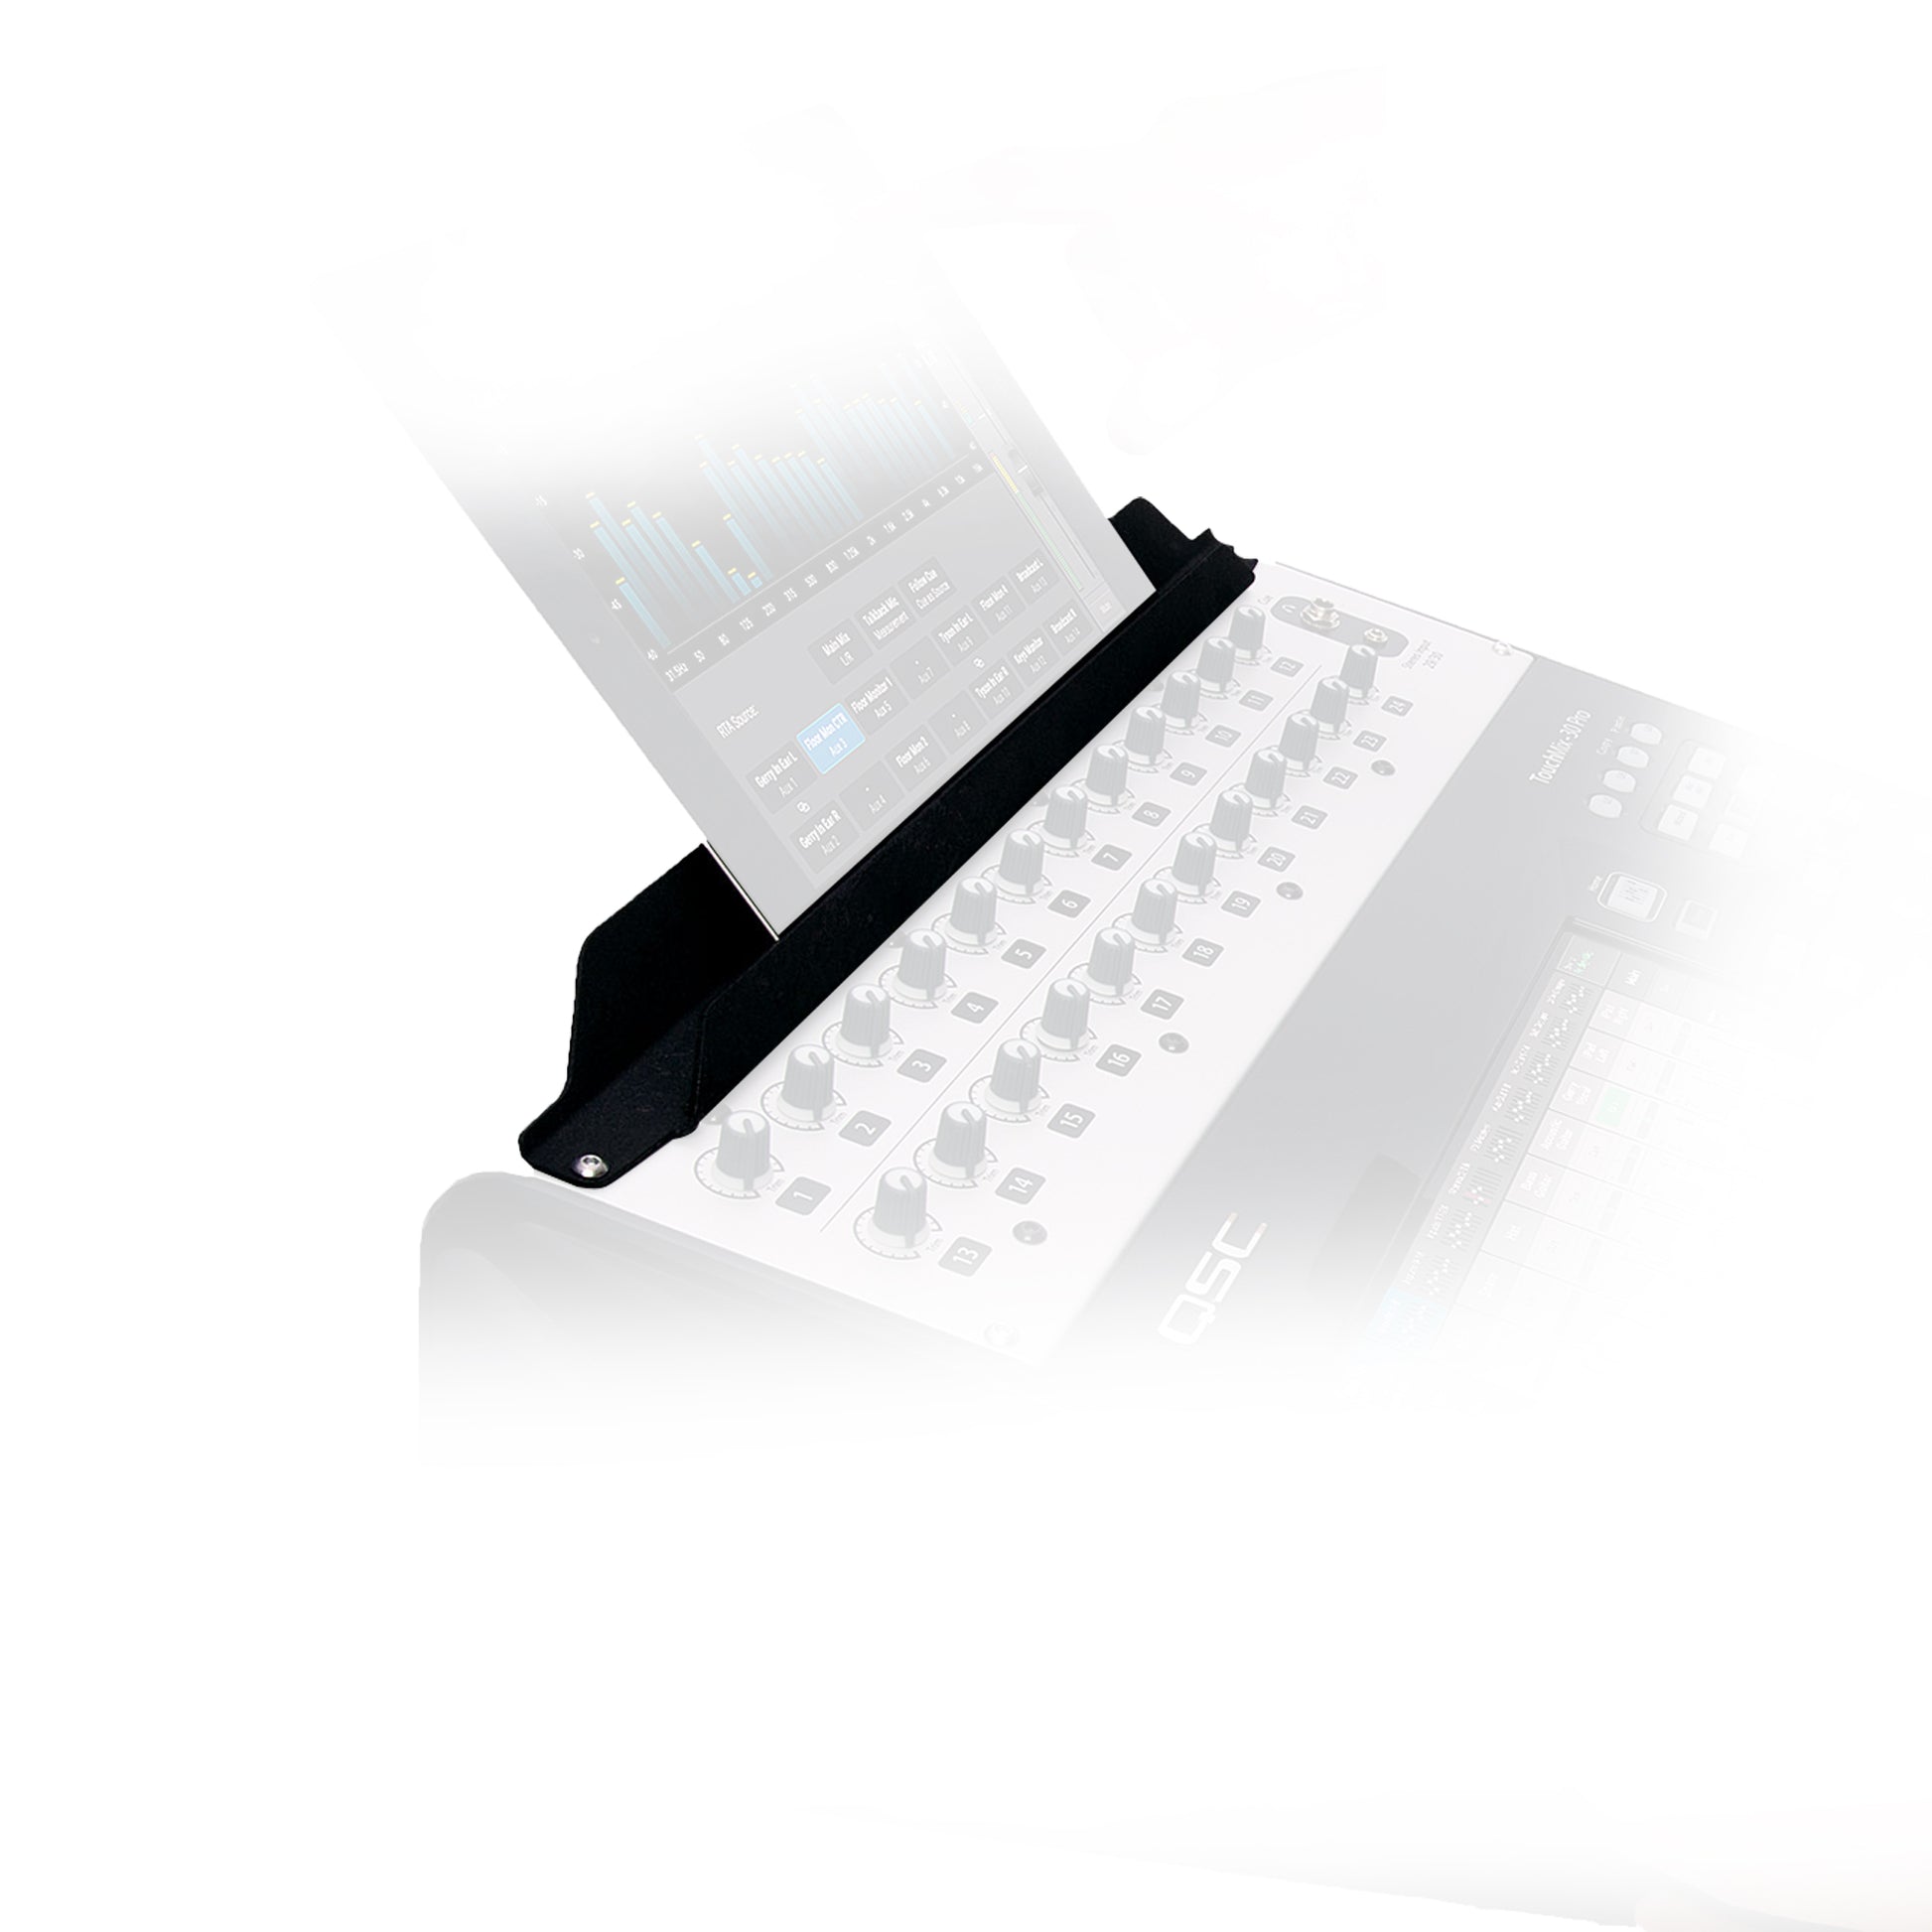 QSC TS-1 TouchMix-30 Tablet Support Stand